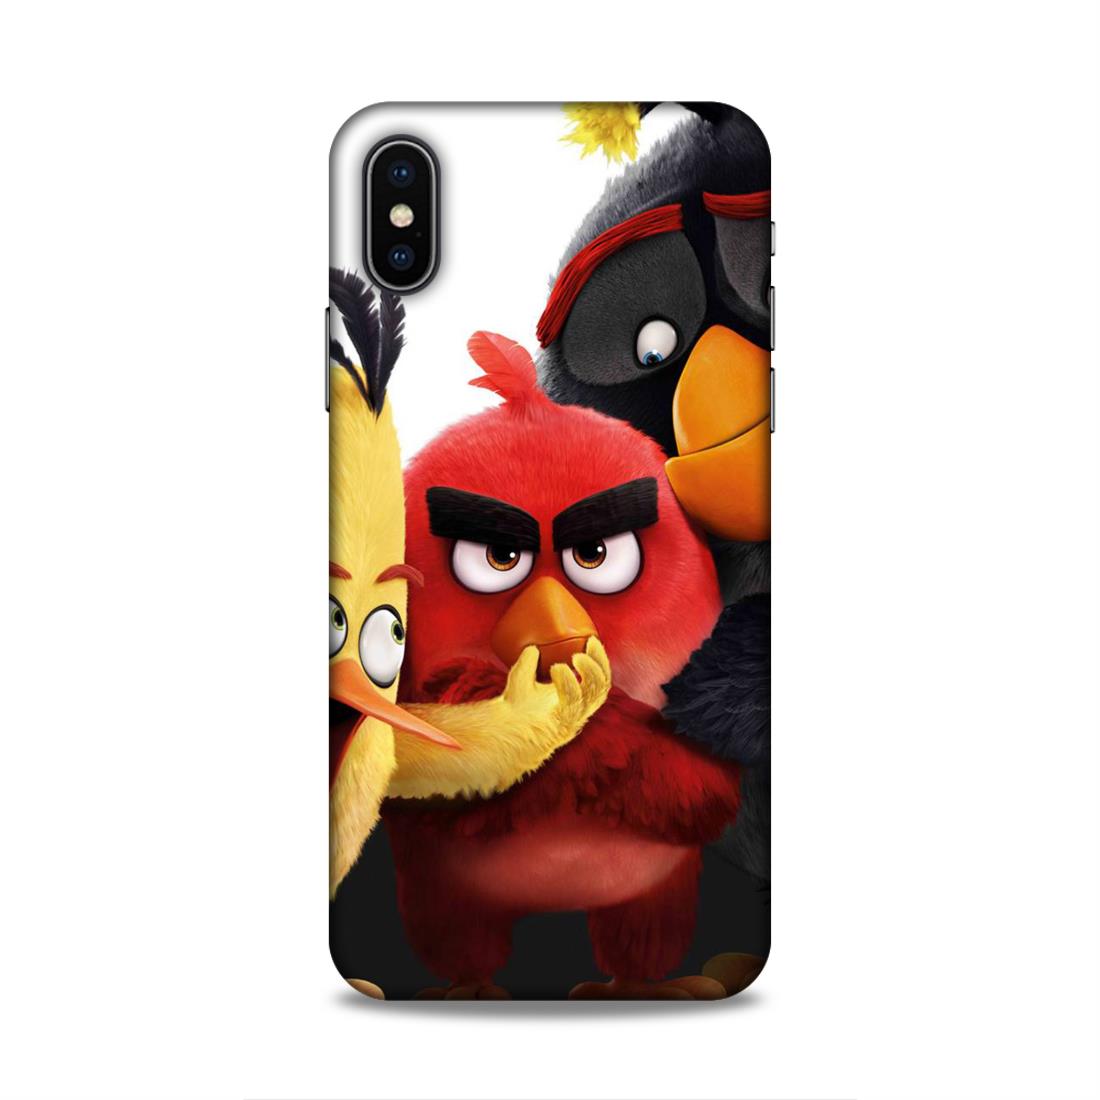 Angry Bird Smile Hard Back Case For Apple iPhone X/XS